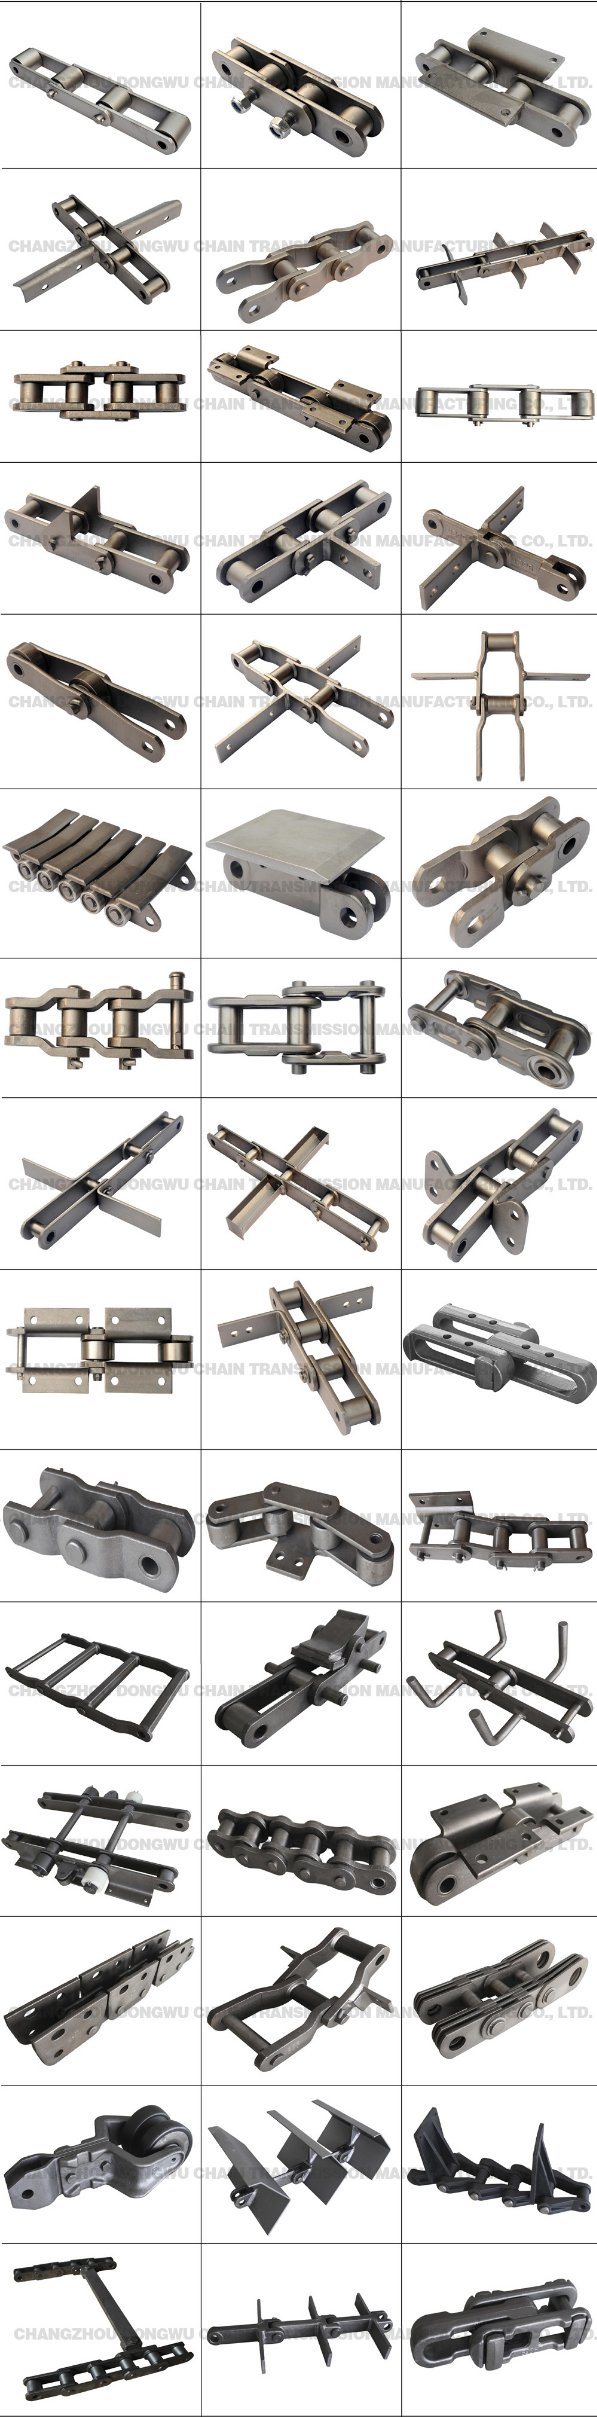 Stainless Steel Version Conveyor Roller Hollow Pin Chains for Palm Oil Industry